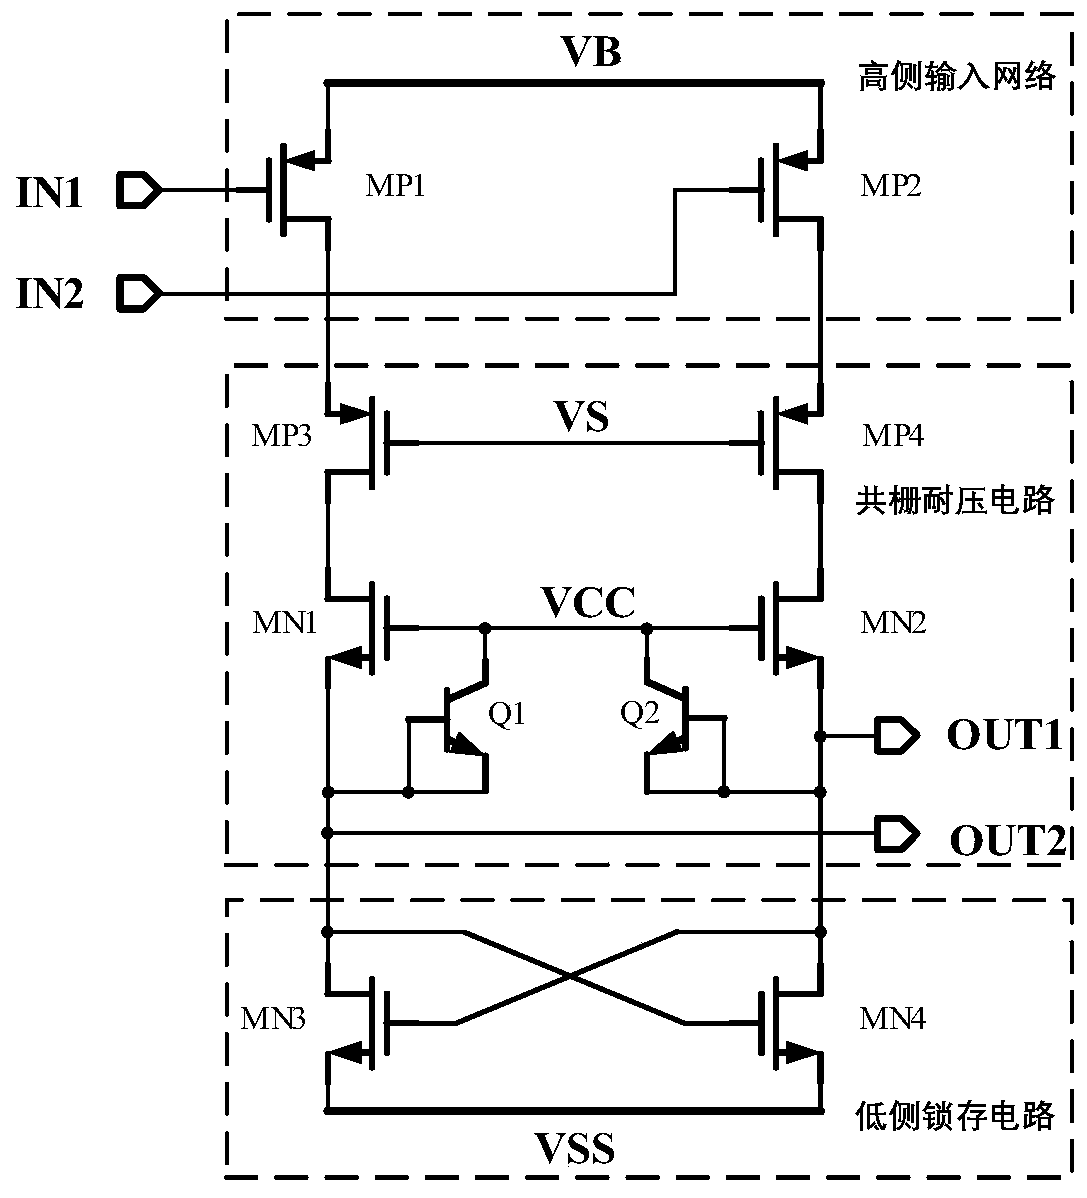 Fast downlink level shift circuit with low working voltage